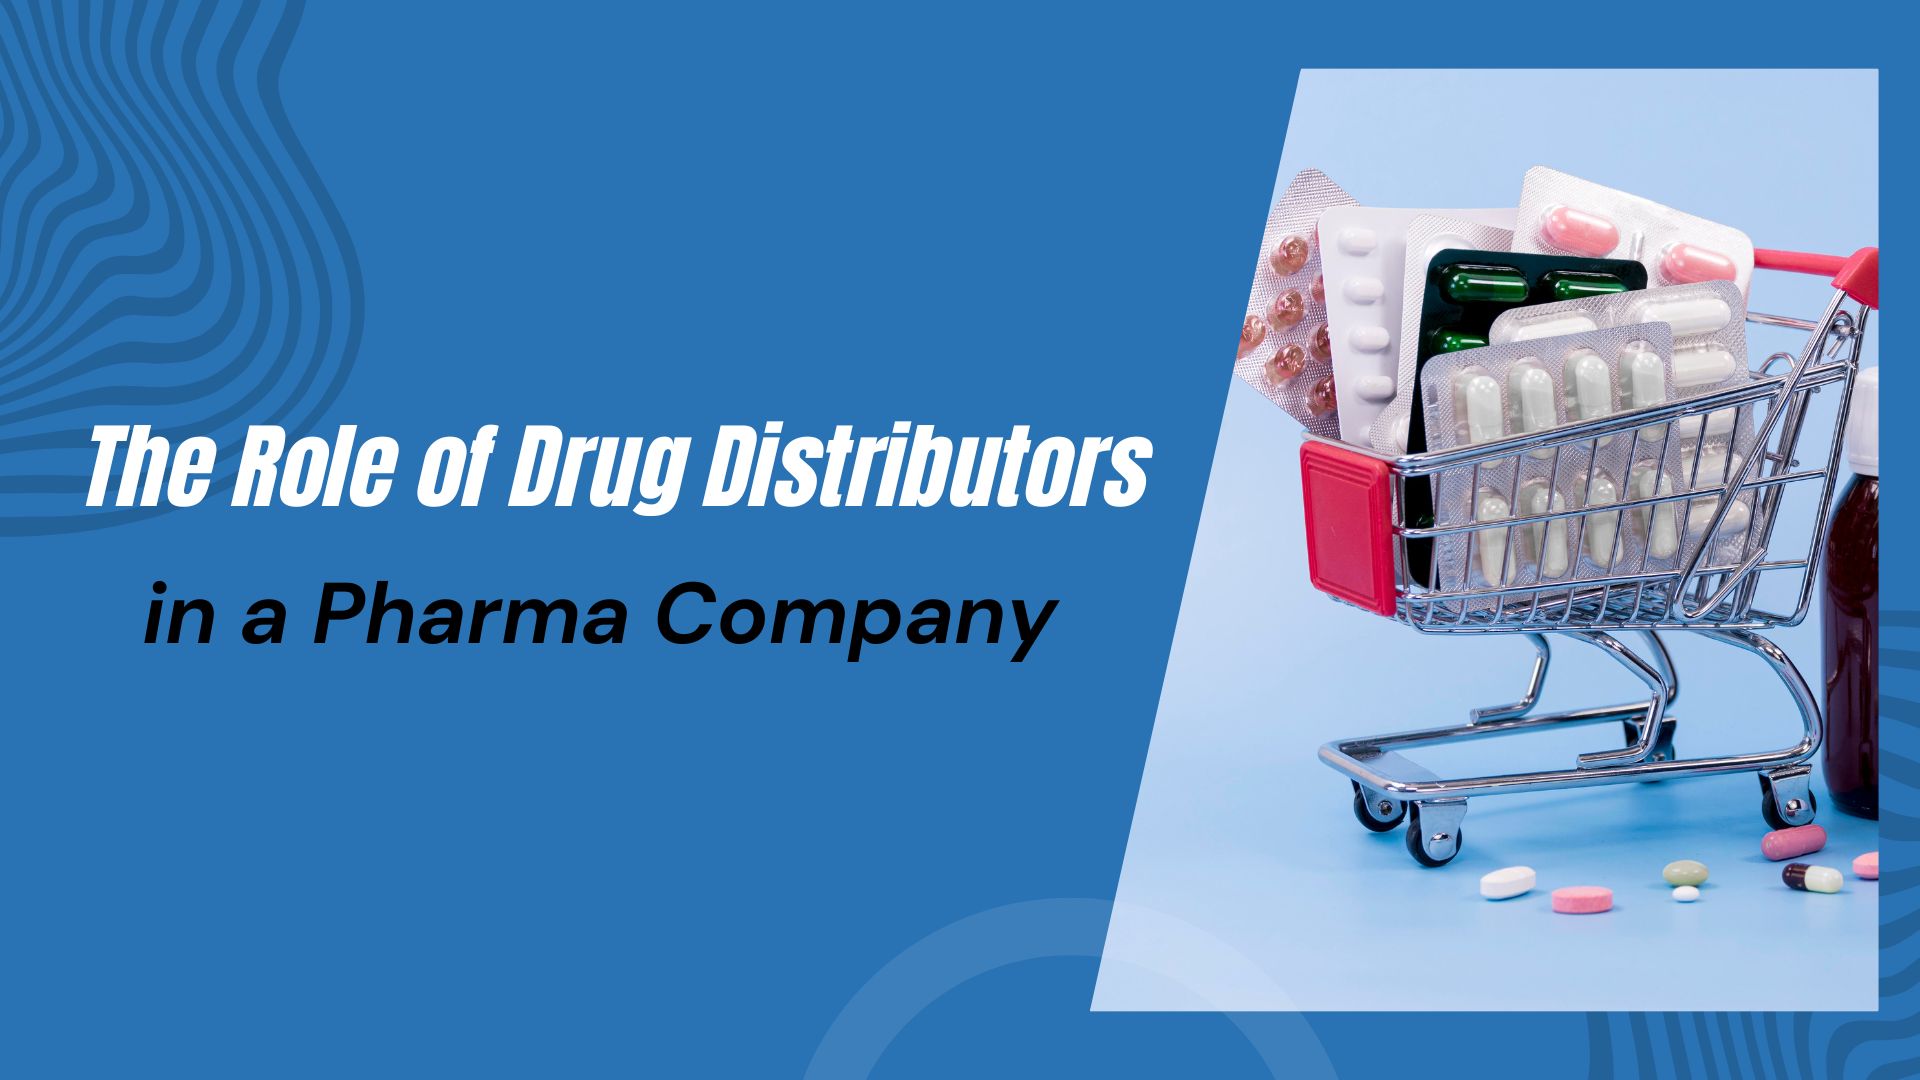 The Role of Drug Distributors in a Pharma Company